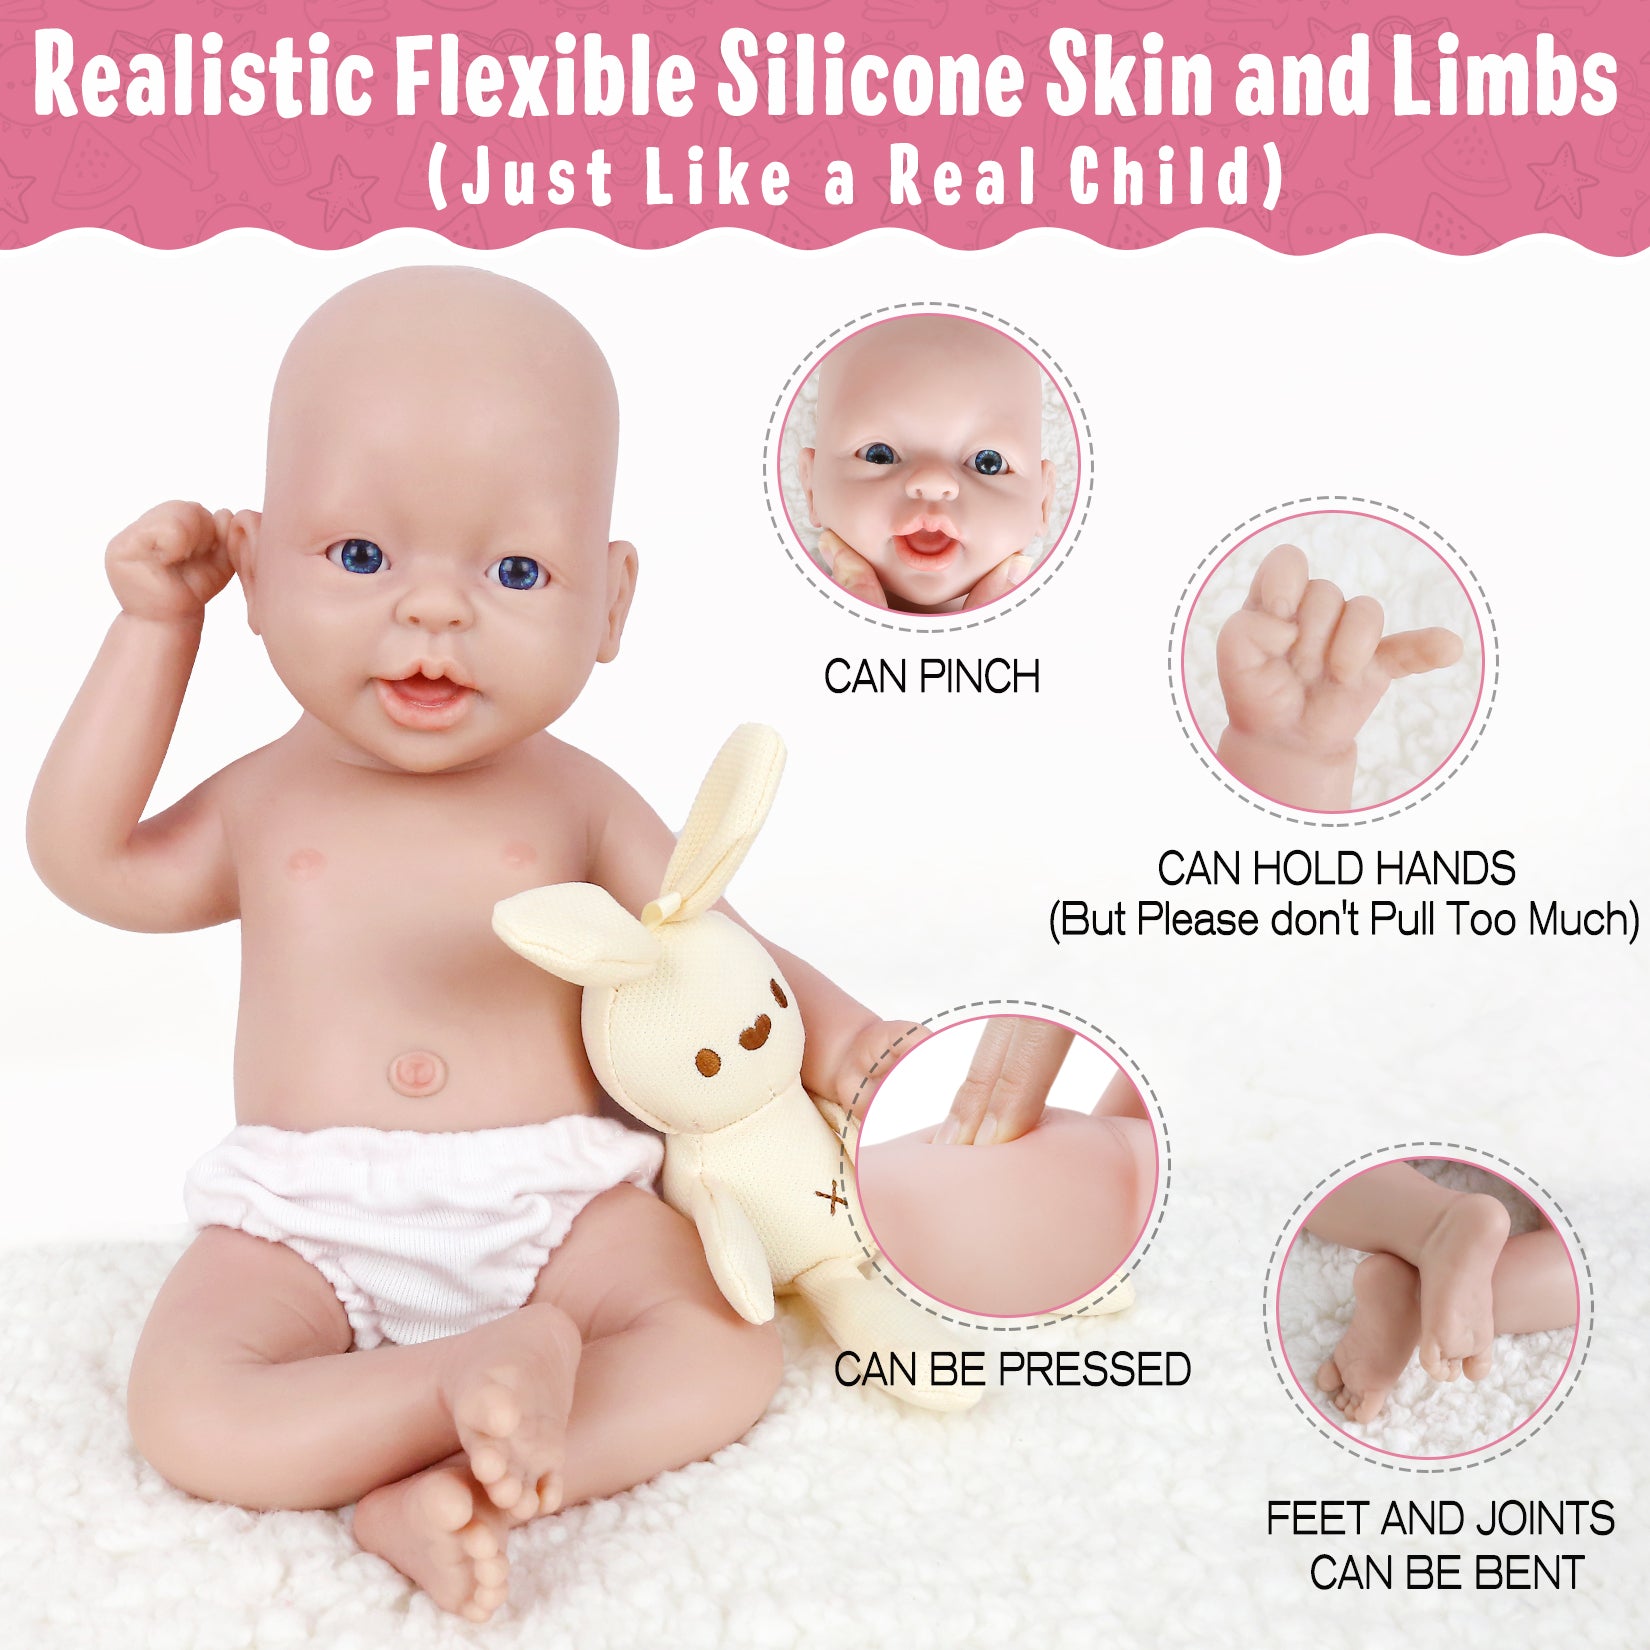 Vollence 14 inch Full Silicone Baby Doll That Look Real,Not Vinyl Dolls,Lifelike  Reborn Baby Dolls,Lifelike Newborn Baby Dolls - Boy price in UAE,   UAE